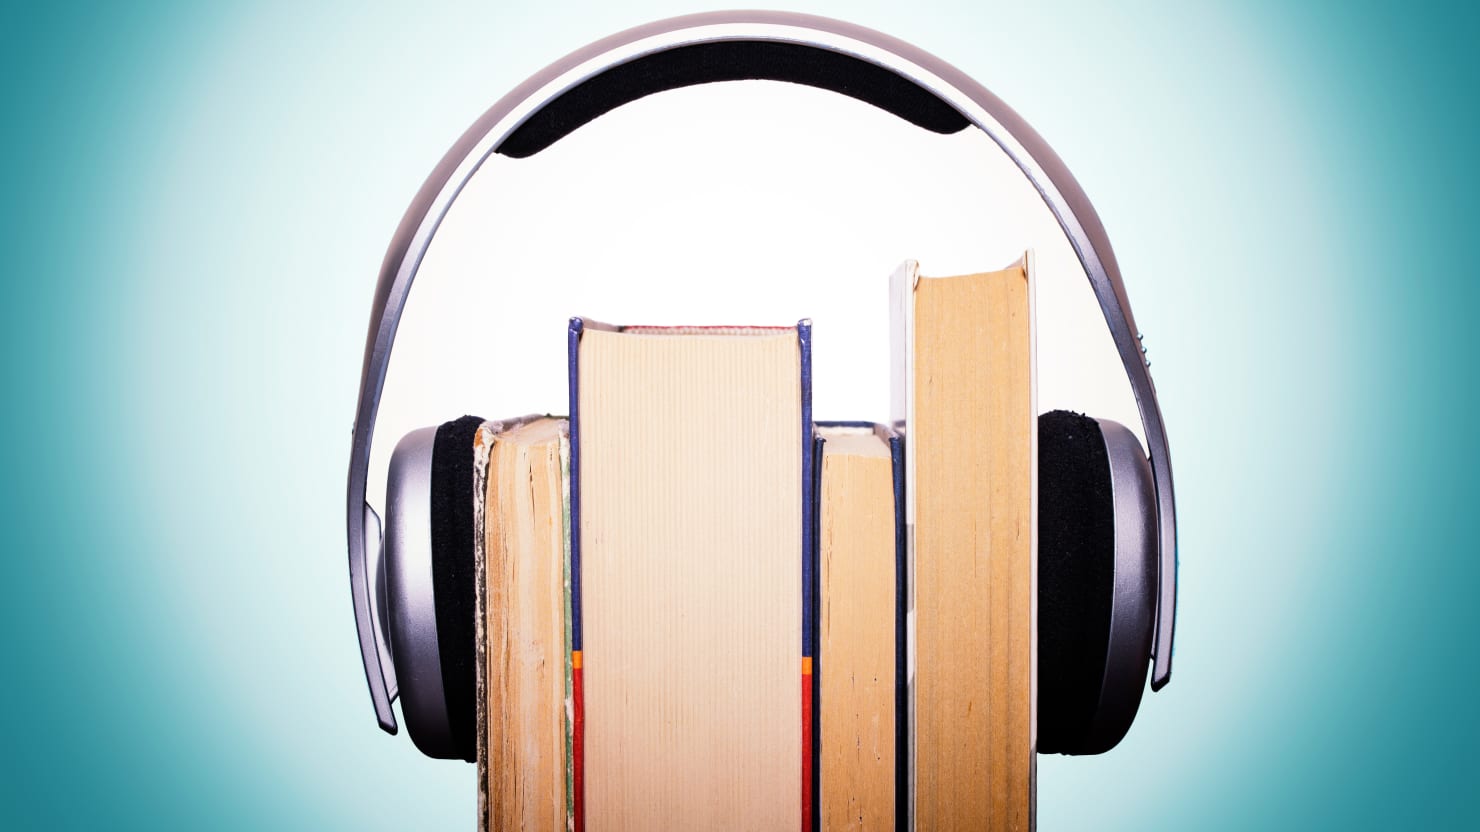 Listen to forex audiobooks online what is mts for forex